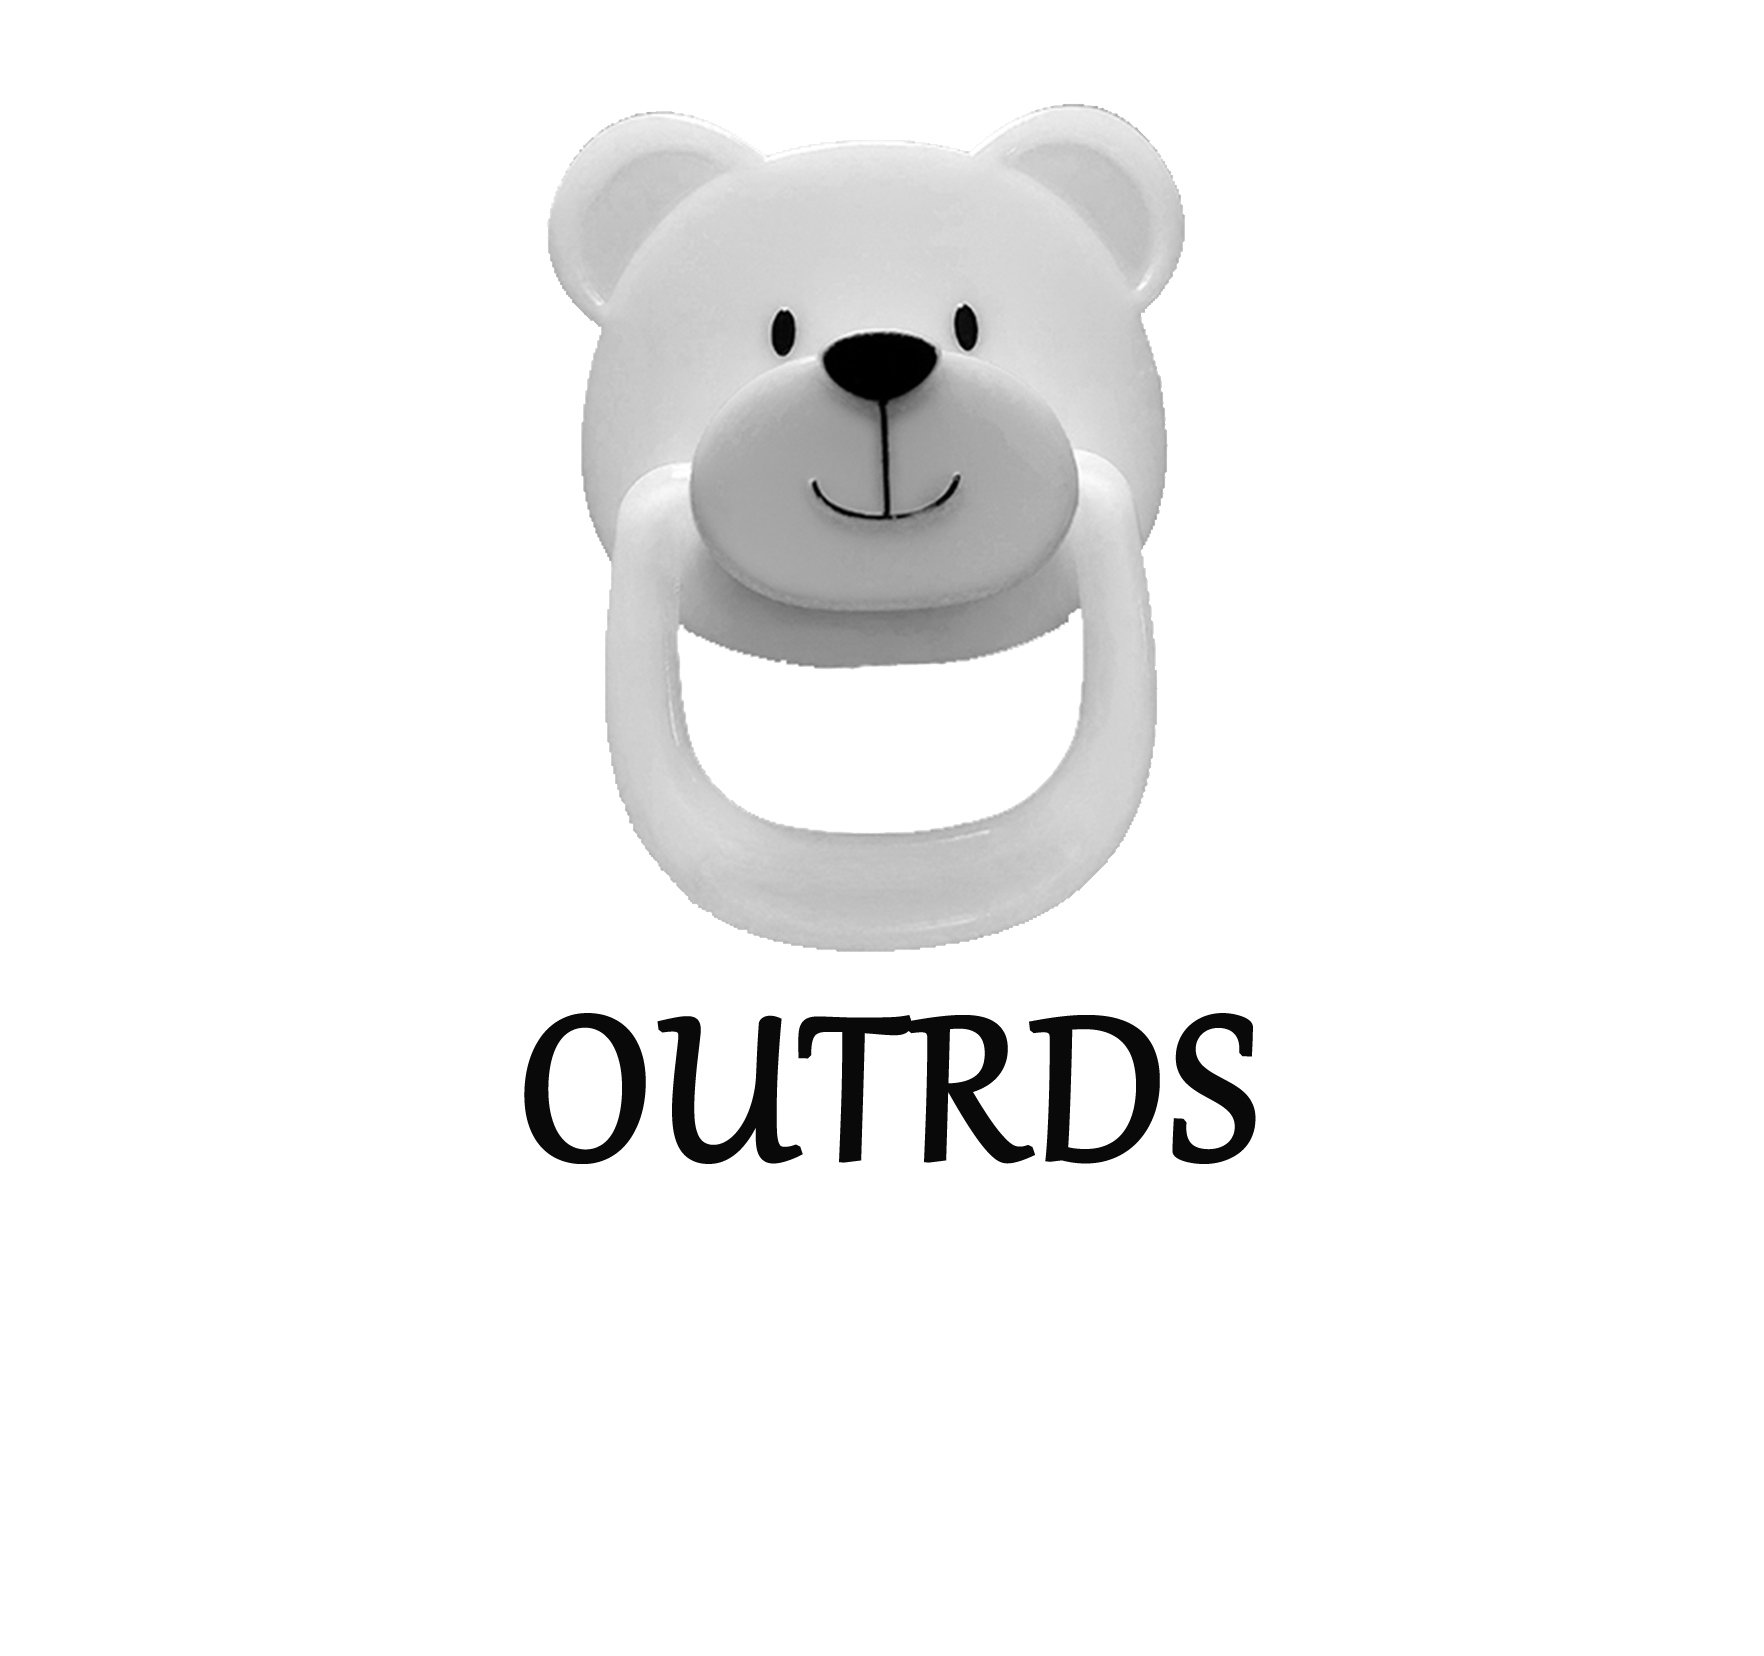  OUTRDS